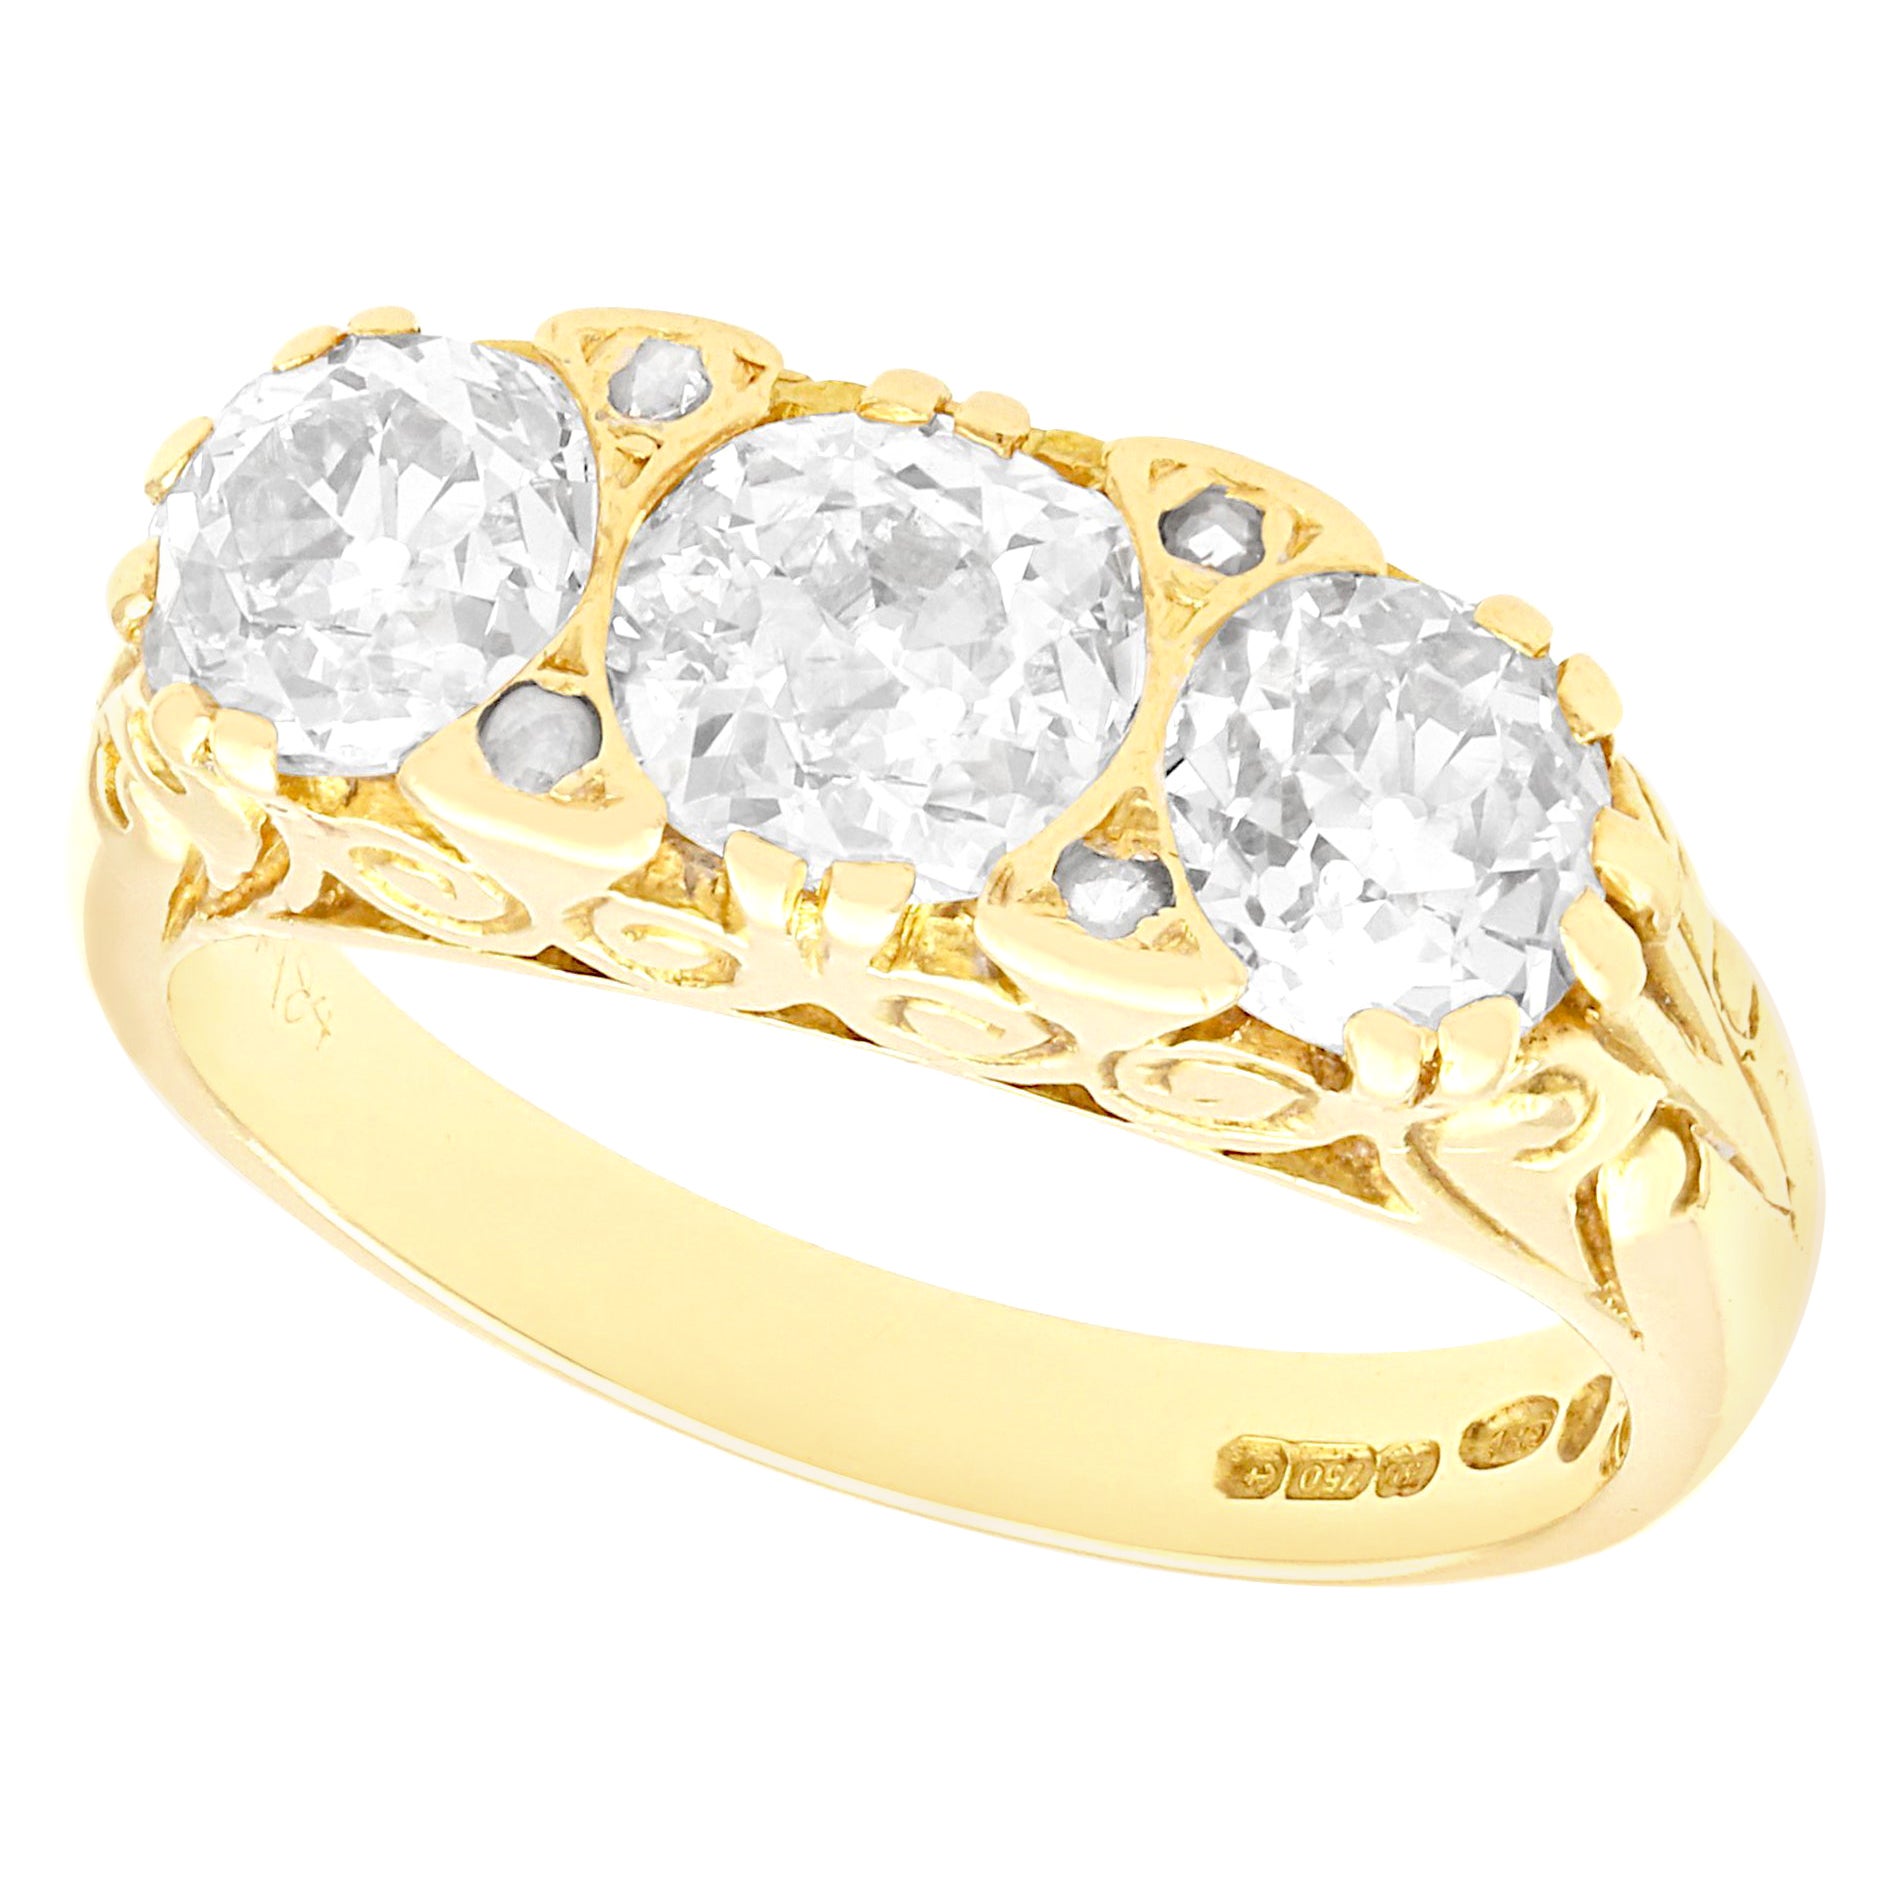 2.01 Carat Diamond and Yellow Gold Trilogy Ring For Sale